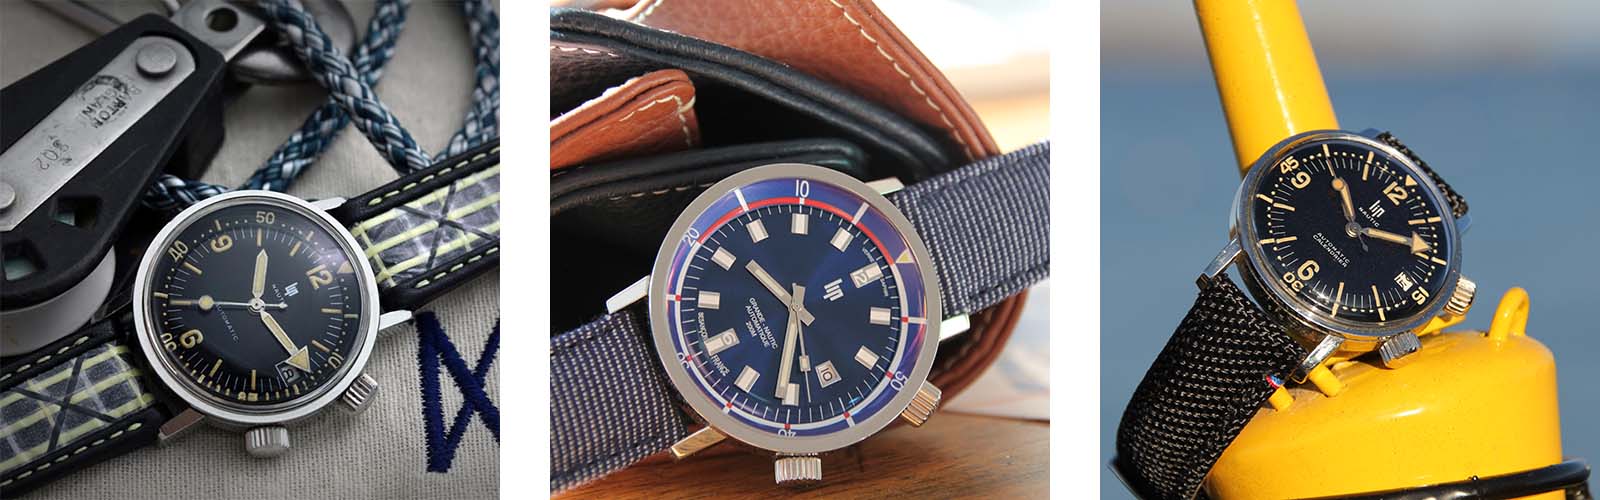 3 LIP Nautic watches with cloth straps